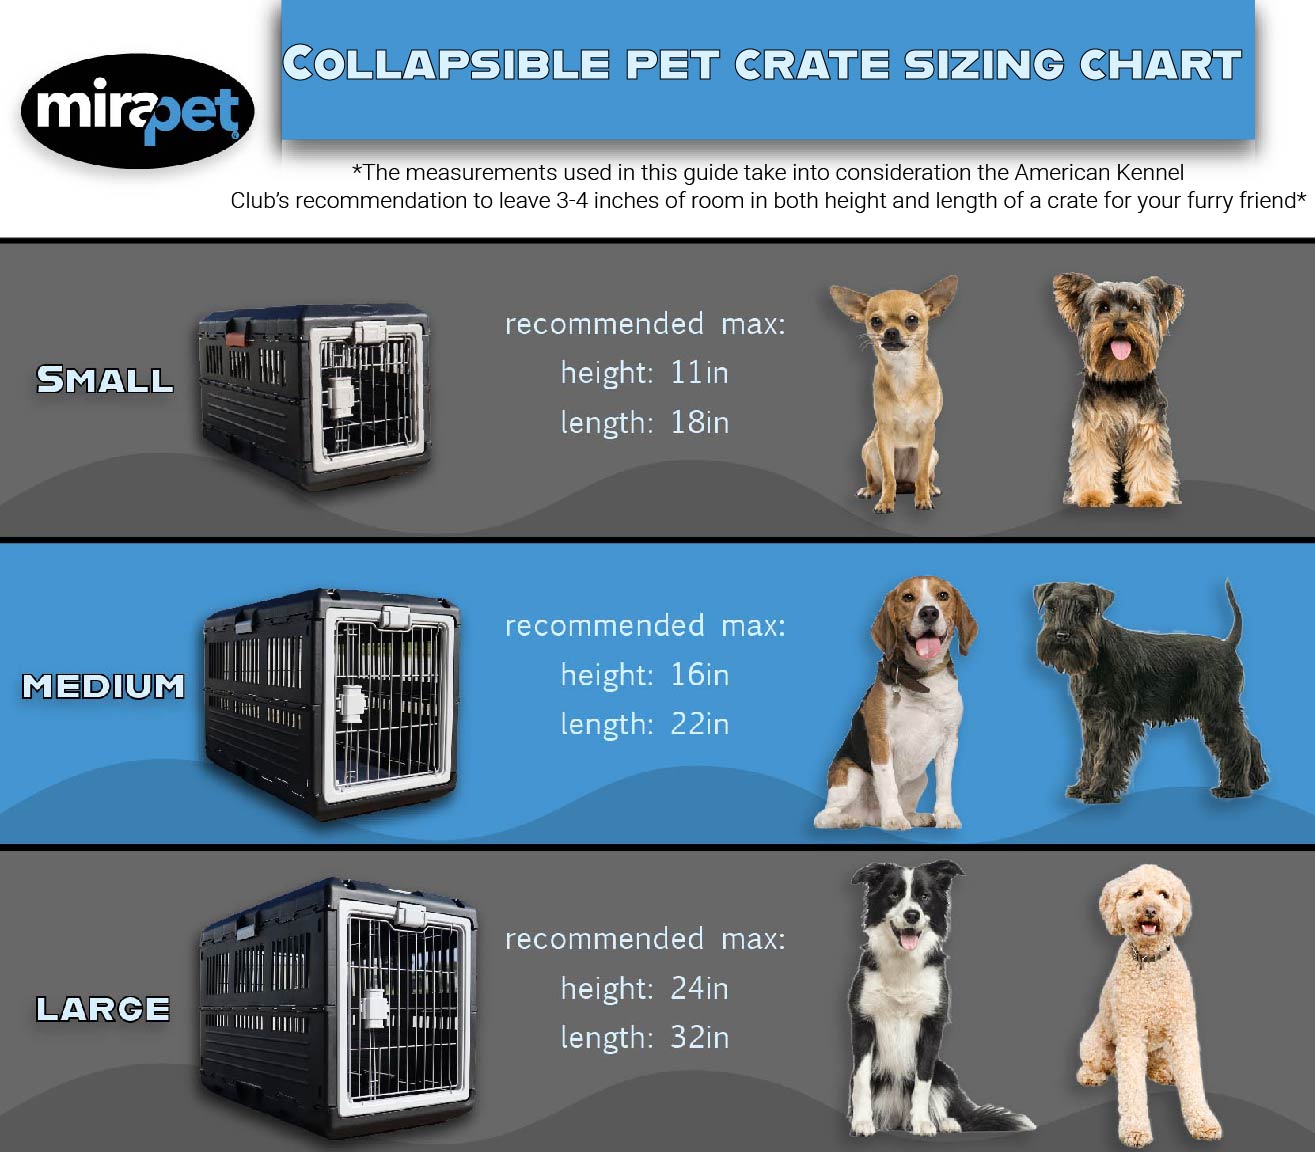 The title of the graphic is collapsible pet crate sizing chart, underneath this it states, "The measurements used in this guide take into consideration the American Kennel Club’s recommendation to leave 3-4 inches of room in both height and length of a crate for your furry friend" under that it has three rows the first stating "Small: recommended max: height: 11in length: 18in, medium: recommended max:  height: 16in. length:22in, Large recommended max: height: 24in length:32in